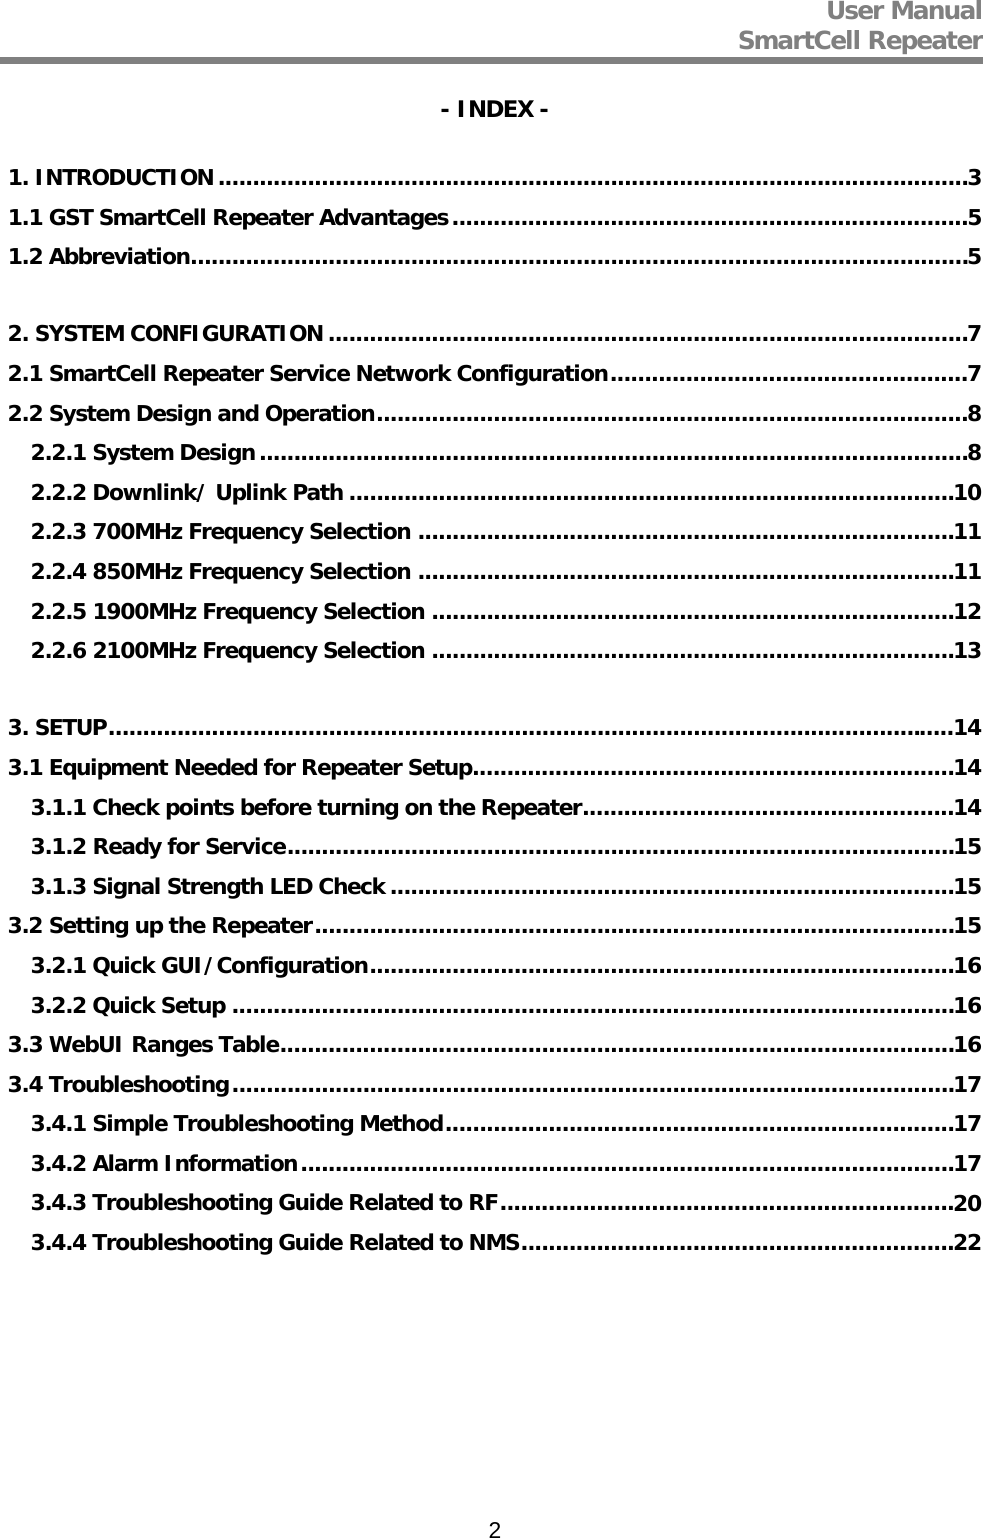 User Manual  SmartCell Repeater   2- INDEX - 1. INTRODUCTION ............................................................................................................. 3 1.1 GST SmartCell Repeater Advantages ........................................................................... 5 1.2 Abbreviation ................................................................................................................. 5 2. SYSTEM CONFIGURATION ............................................................................................. 7 2.1 SmartCell Repeater Service Network Configuration .................................................... 7 2.2 System Design and Operation ...................................................................................... 8 2.2.1 System Design ....................................................................................................... 8 2.2.2 Downlink/ Uplink Path ........................................................................................ 10 2.2.3 700MHz Frequency Selection .............................................................................. 11 2.2.4 850MHz Frequency Selection .............................................................................. 11 2.2.5 1900MHz Frequency Selection ............................................................................ 12 2.2.6 2100MHz Frequency Selection ............................................................................ 13 3. SETUP ........................................................................................................................... 14 3.1 Equipment Needed for Repeater Setup ...................................................................... 14 3.1.1 Check points before turning on the Repeater ...................................................... 14 3.1.2 Ready for Service ................................................................................................. 15 3.1.3 Signal Strength LED Check .................................................................................. 15 3.2 Setting up the Repeater ............................................................................................. 15 3.2.1 Quick GUI/Configuration ..................................................................................... 16 3.2.2 Quick Setup ......................................................................................................... 16 3.3 WebUI Ranges Table .................................................................................................. 16 3.4 Troubleshooting ......................................................................................................... 17 3.4.1 Simple Troubleshooting Method .......................................................................... 17 3.4.2 Alarm Information ............................................................................................... 17 3.4.3 Troubleshooting Guide Related to RF .................................................................. 20 3.4.4 Troubleshooting Guide Related to NMS ............................................................... 22        